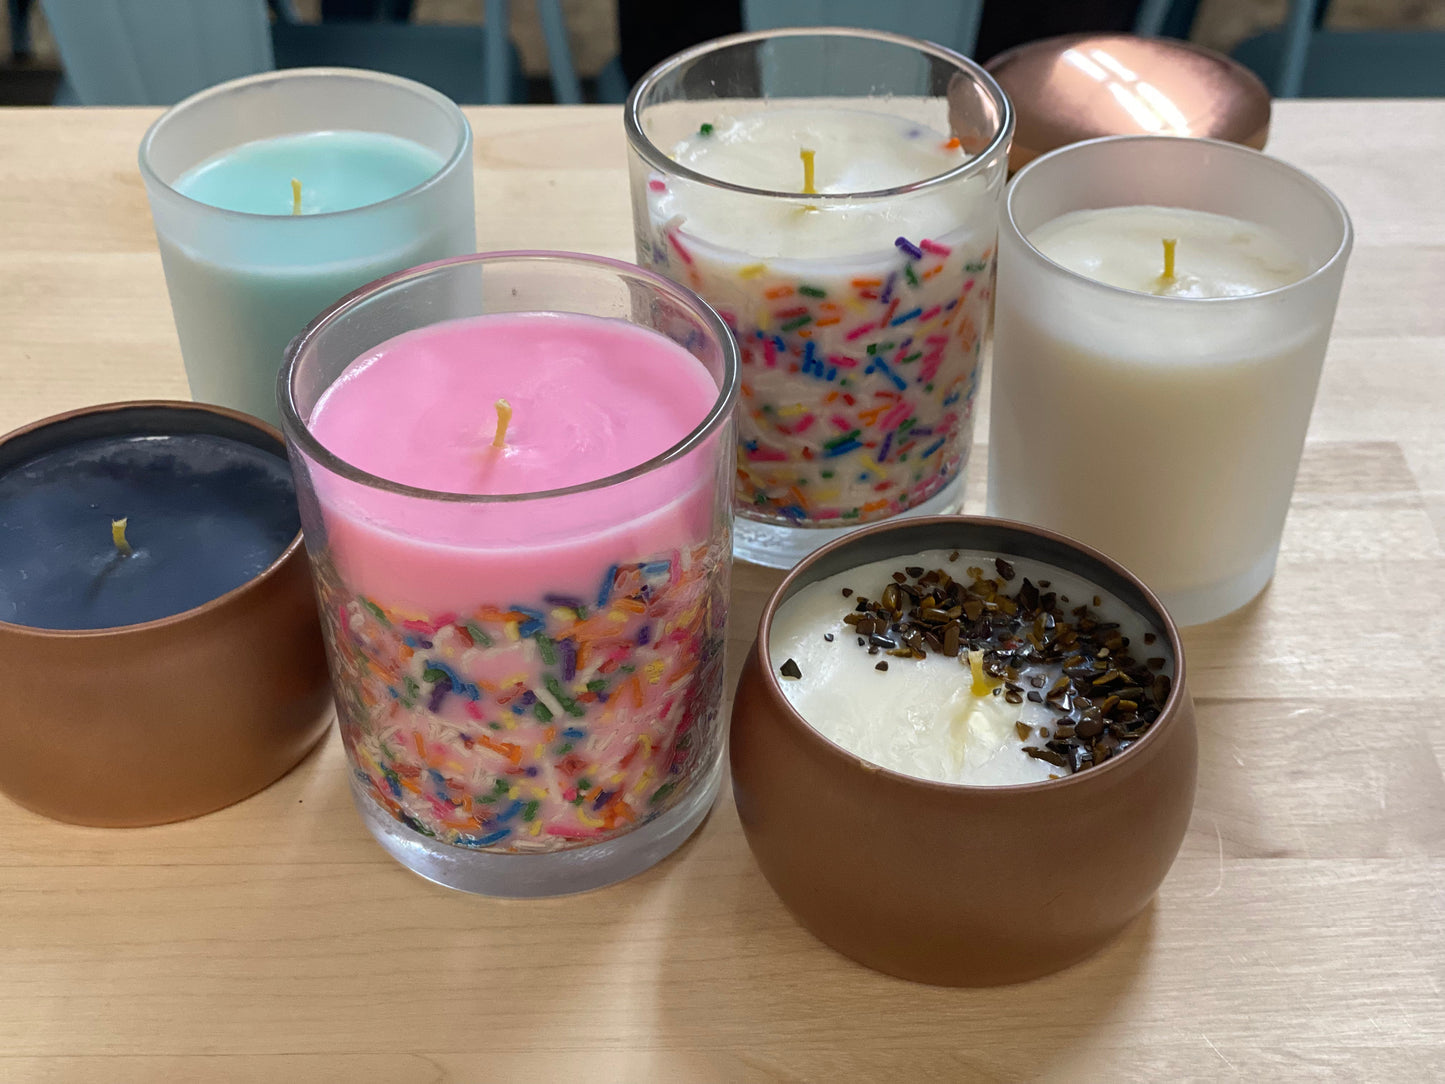 January 27 OPEN Candle Making Class